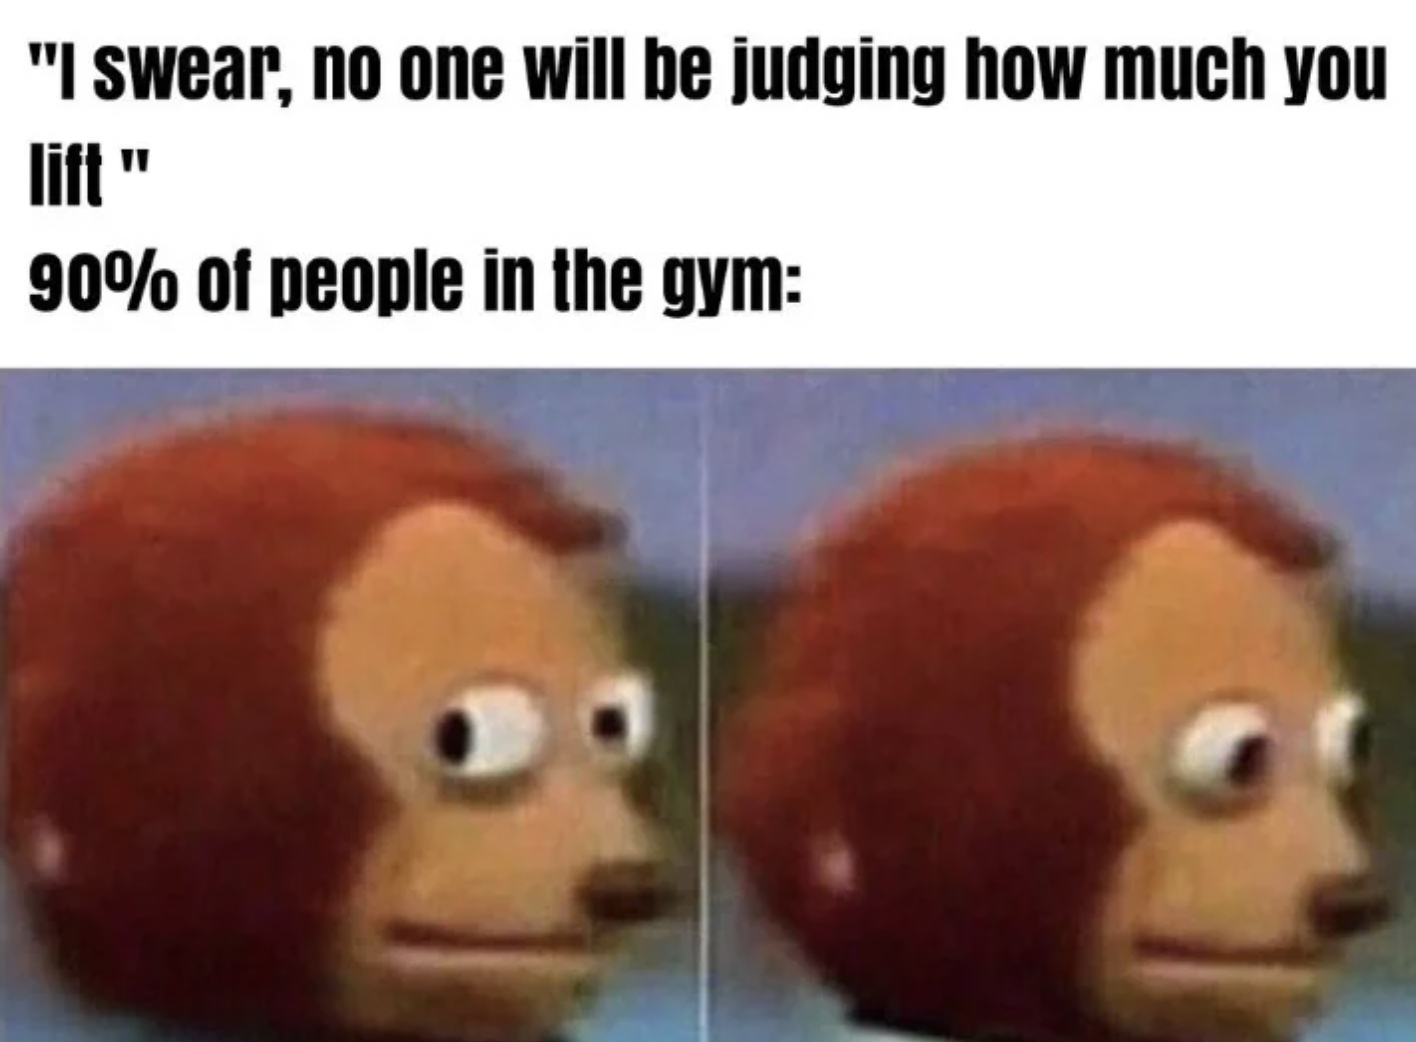 head - "I swear, no one will be judging how much you 90% of people in the gym